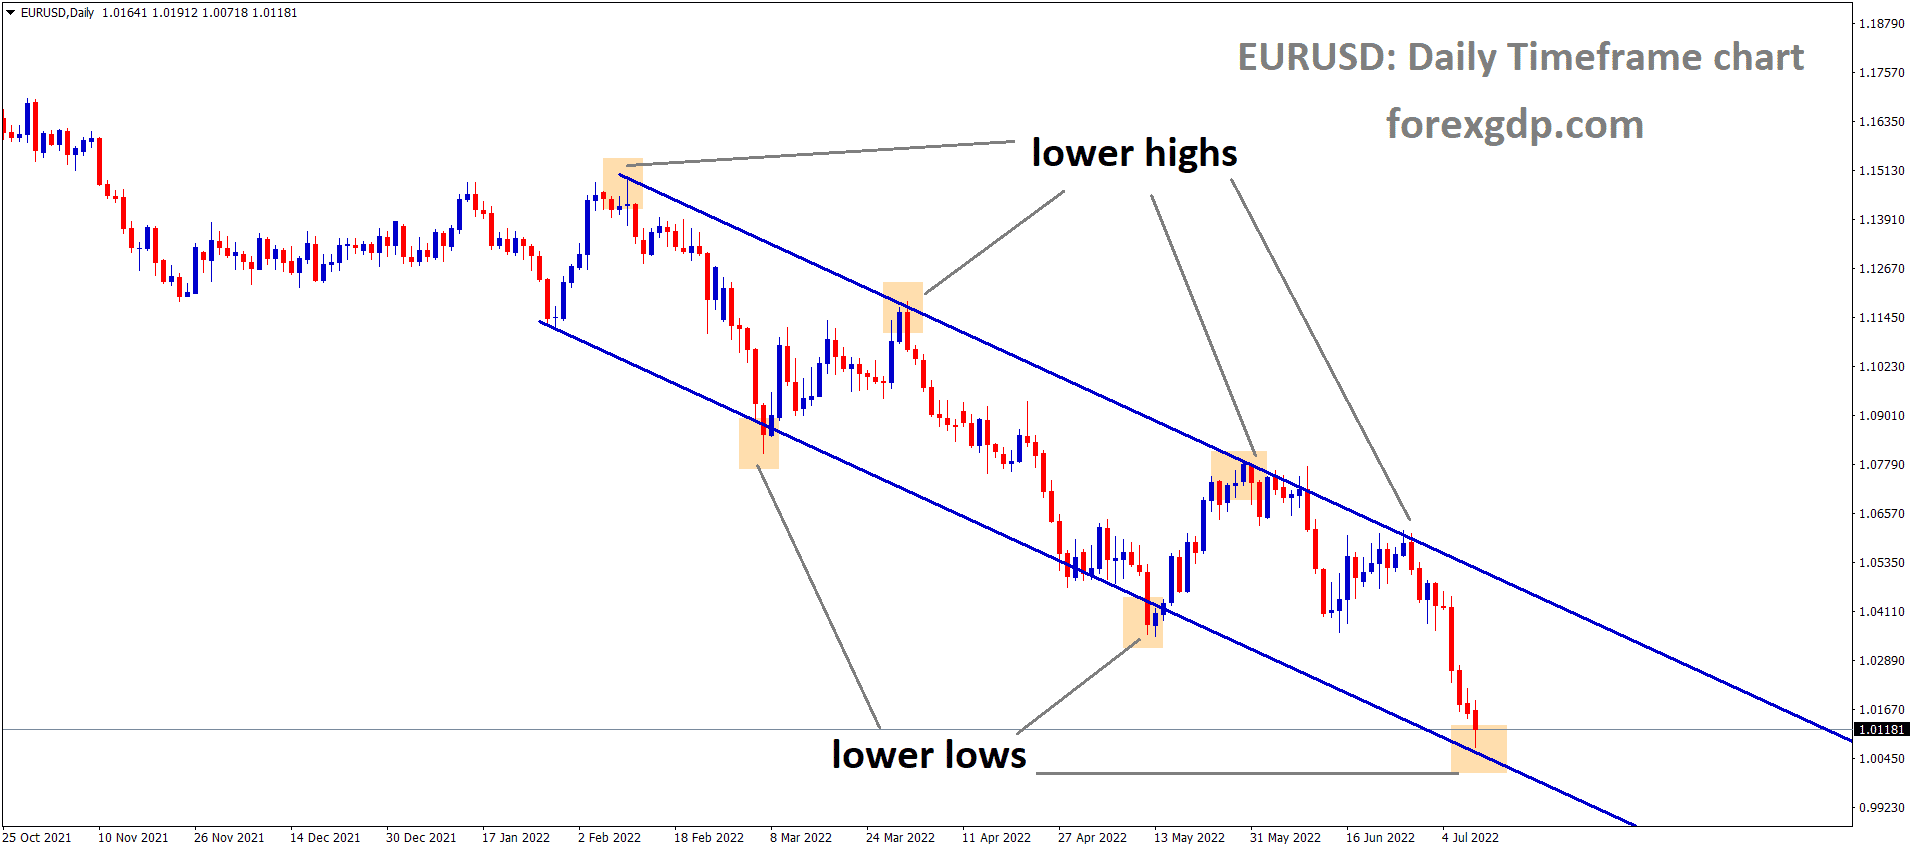 EURUSD is moving in the Descending channel and the Market has reached the Lower Low area of the channel